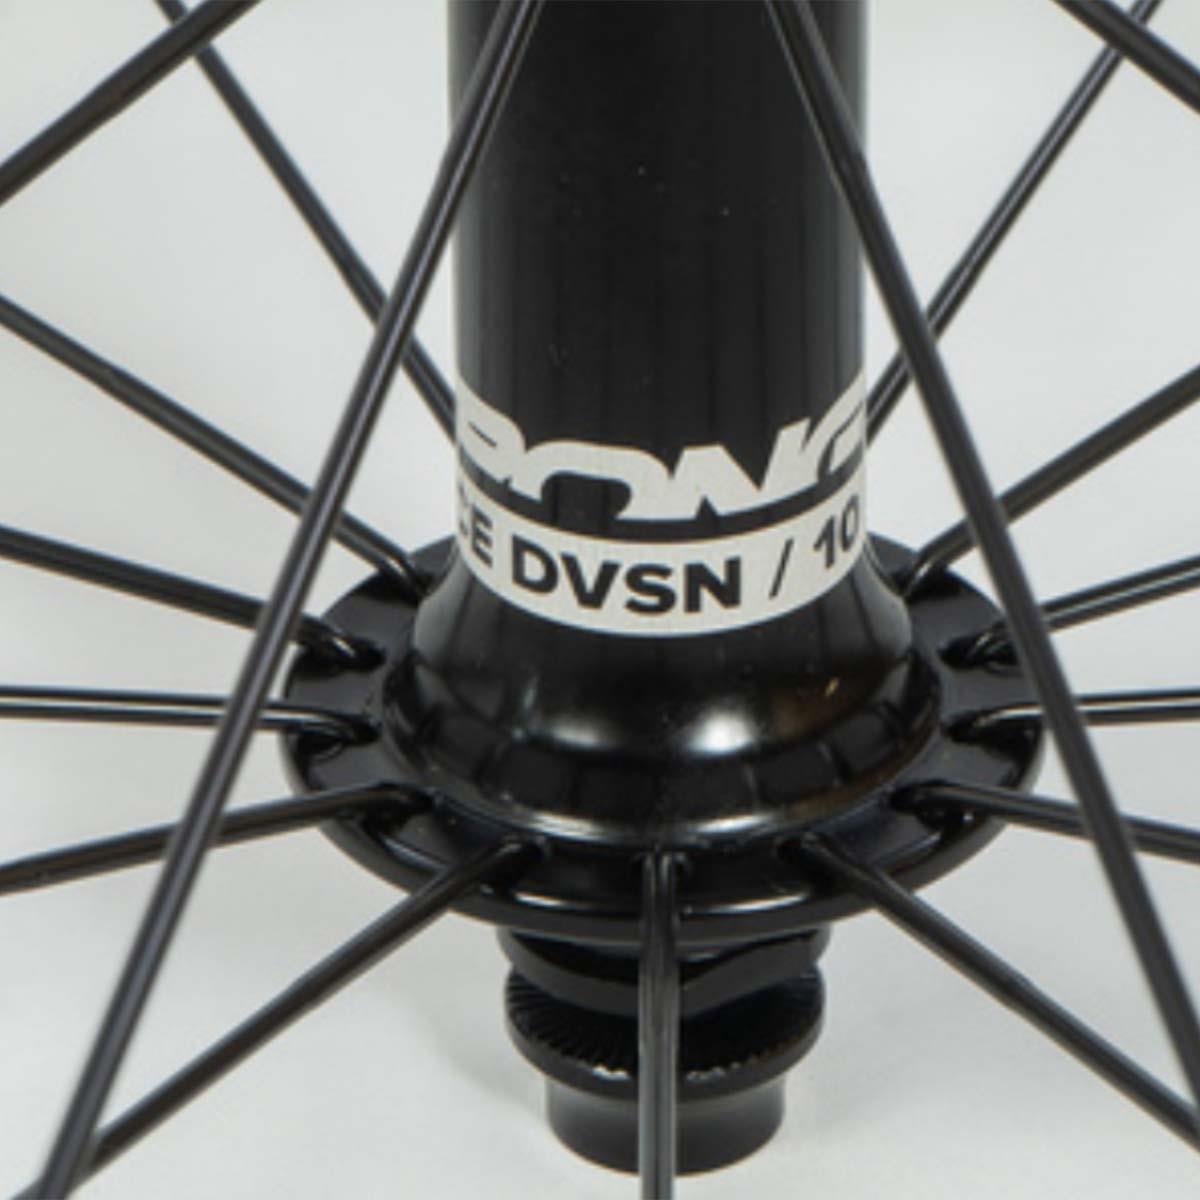 Stay Strong Carbon 20" Disc 1.75" Wheelset